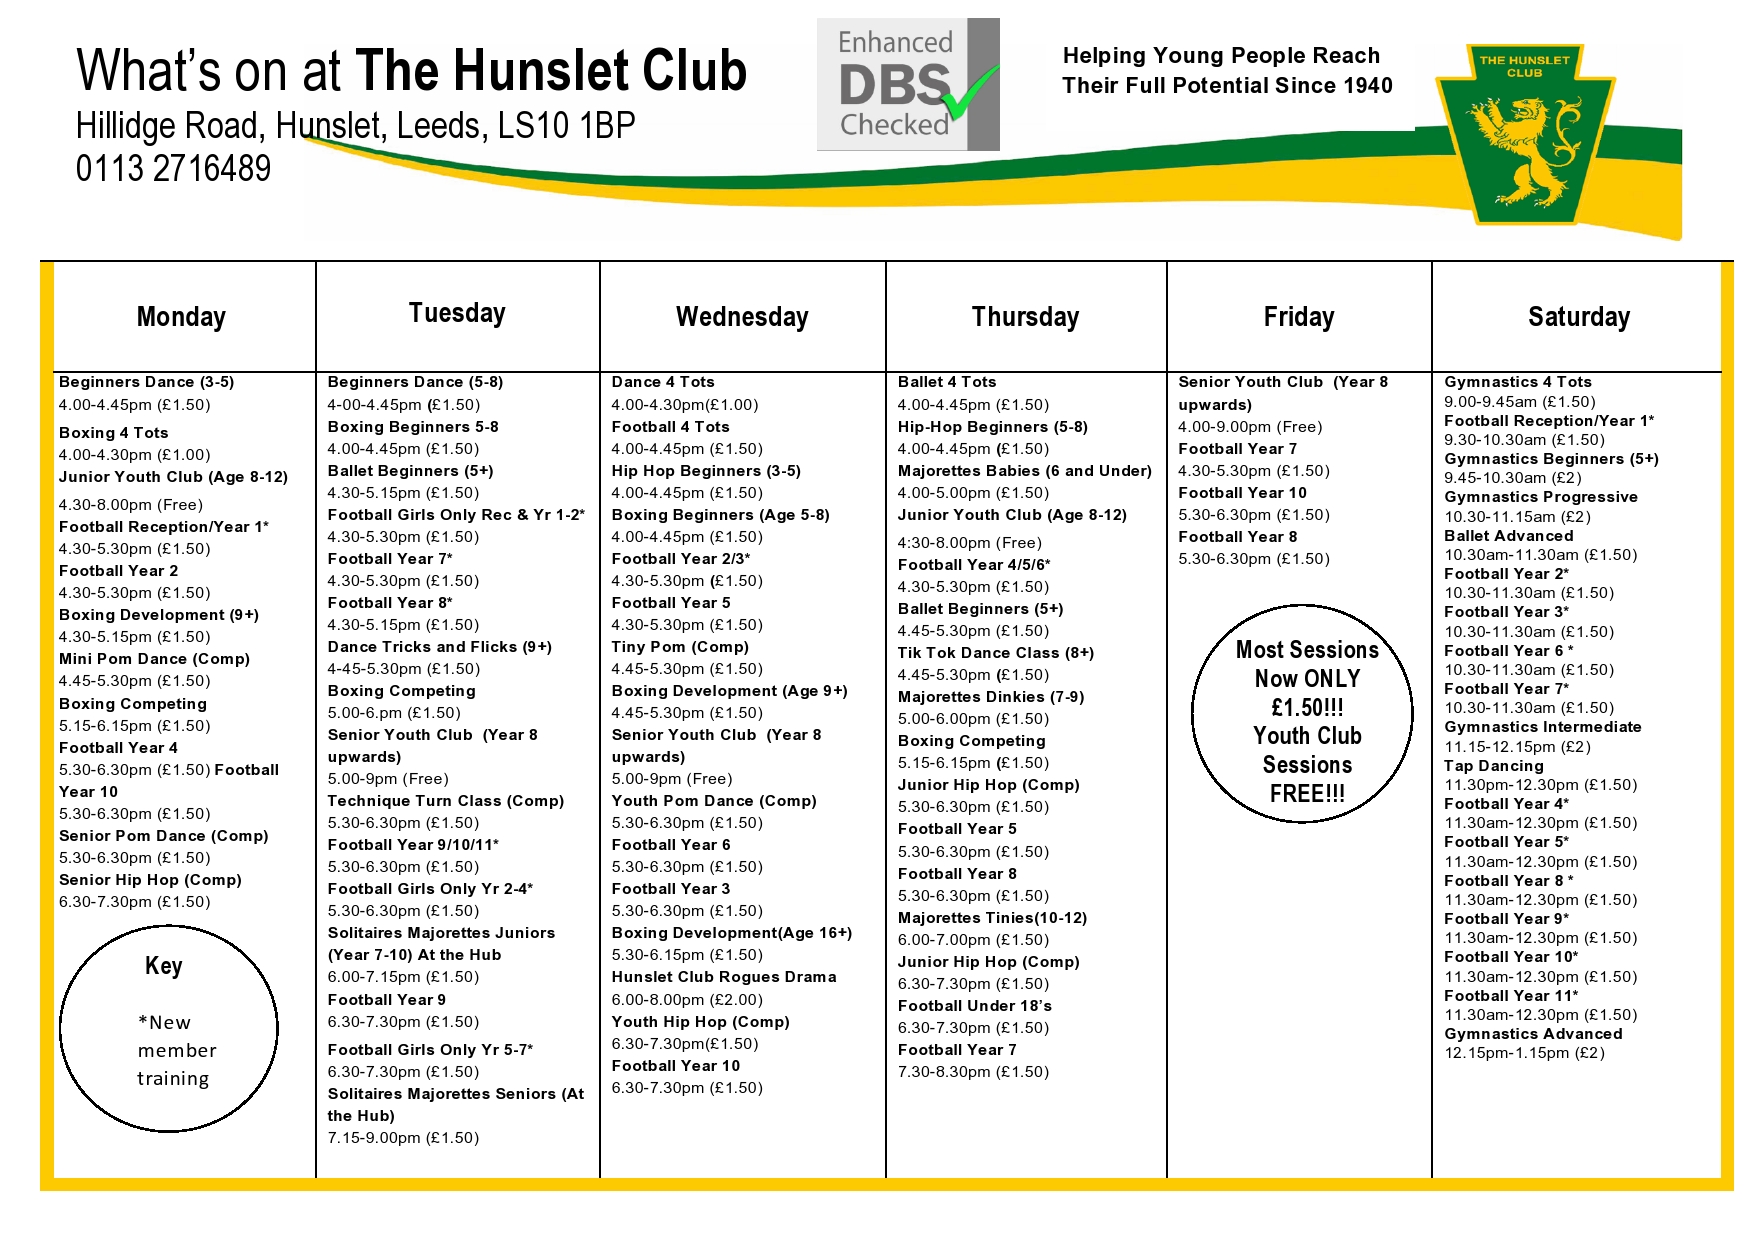 New Hunslet Club Timetable